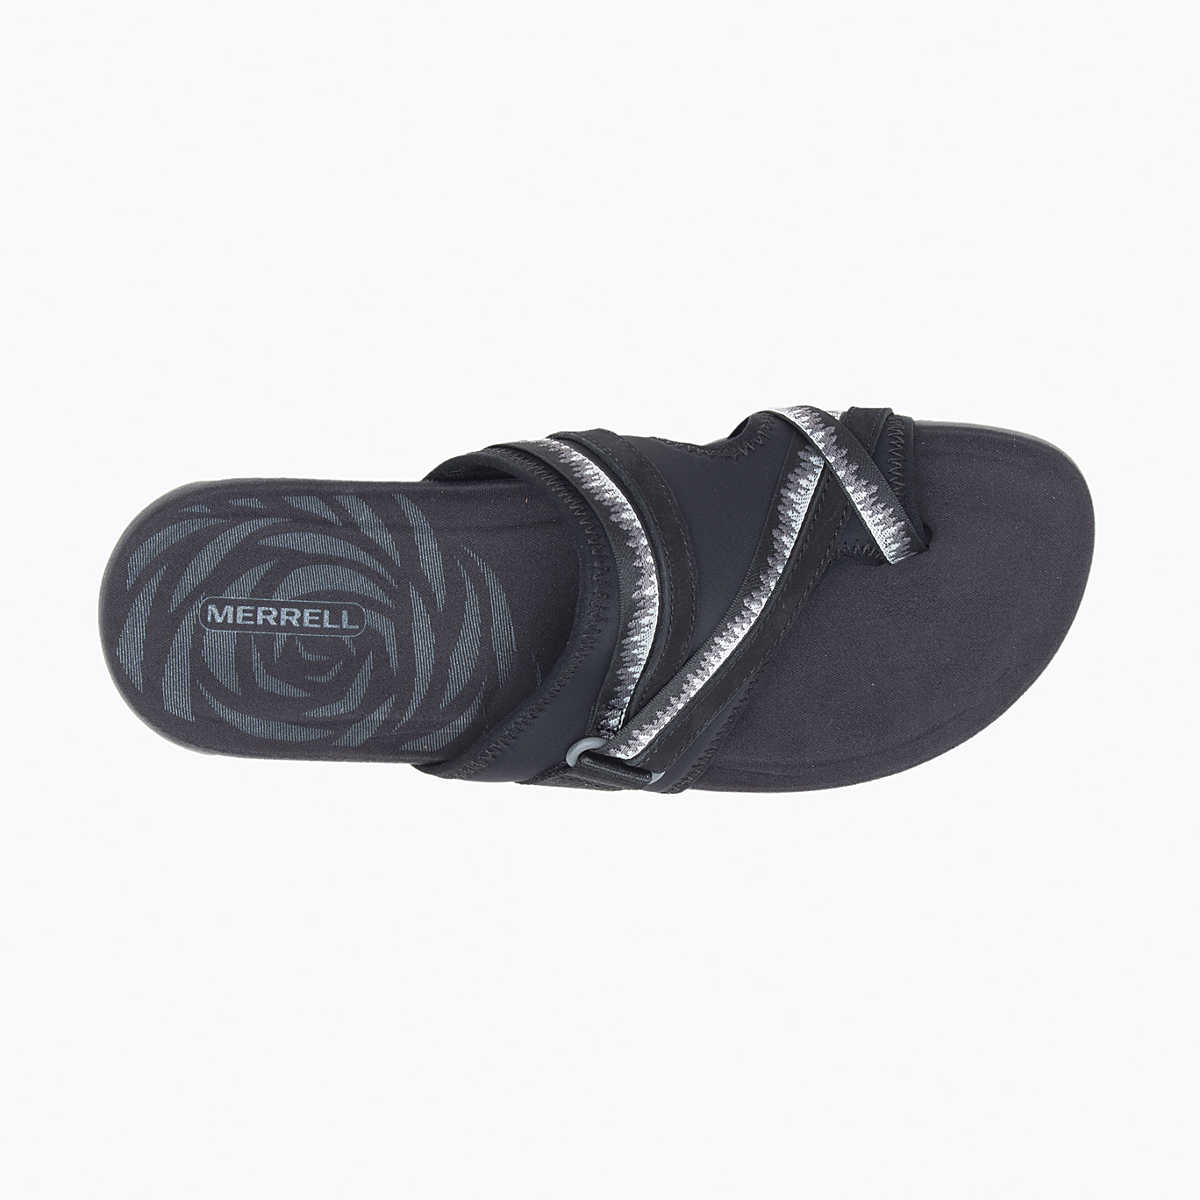 100% Recycled TPR Outsole - Offers traction and durability for outdoor activities.